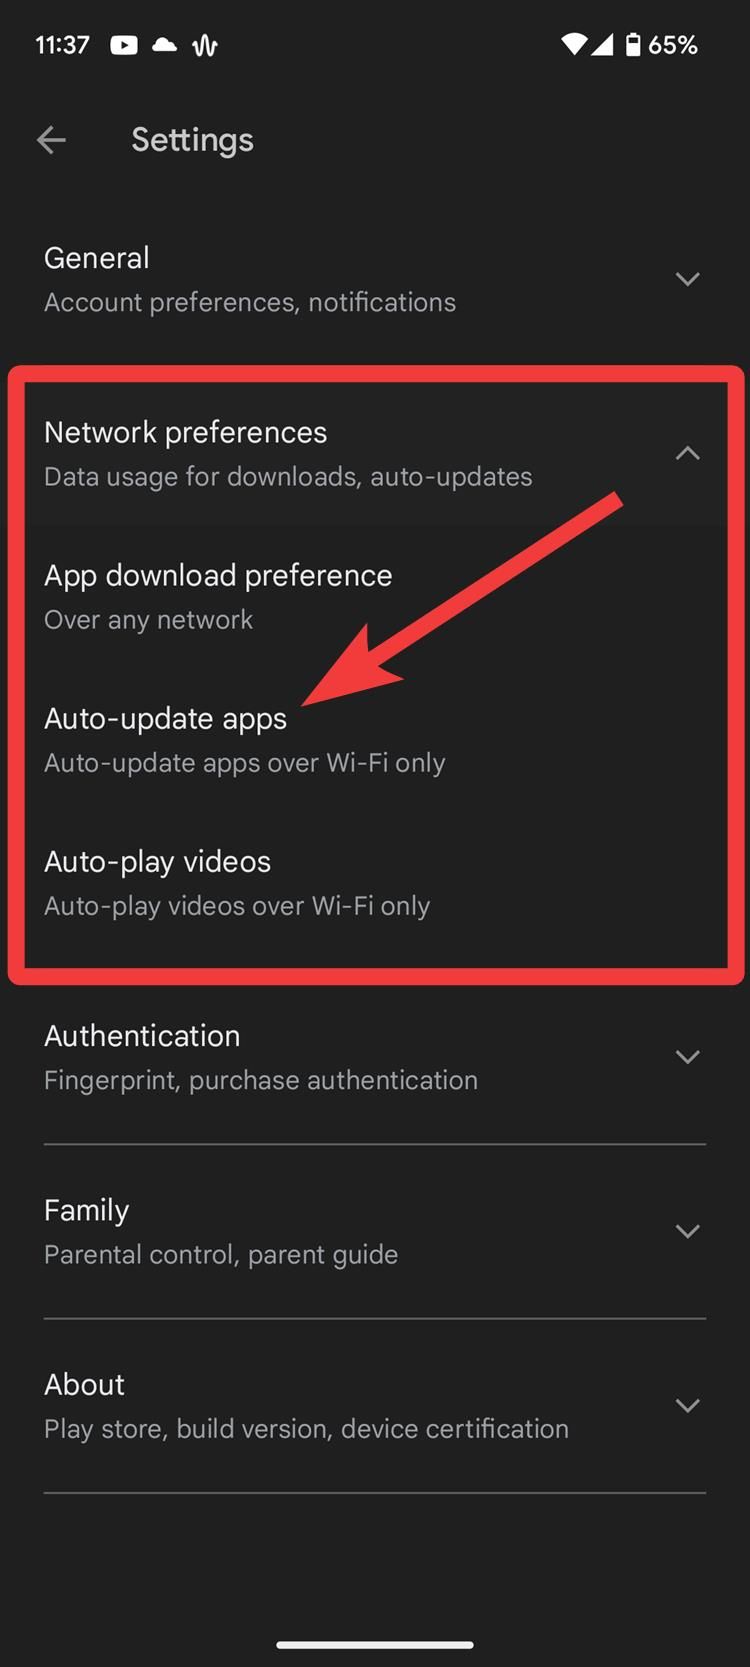 The Google Play Store Settings menu with a red box around app update related options and a red arrow pointing to Auto-update apps